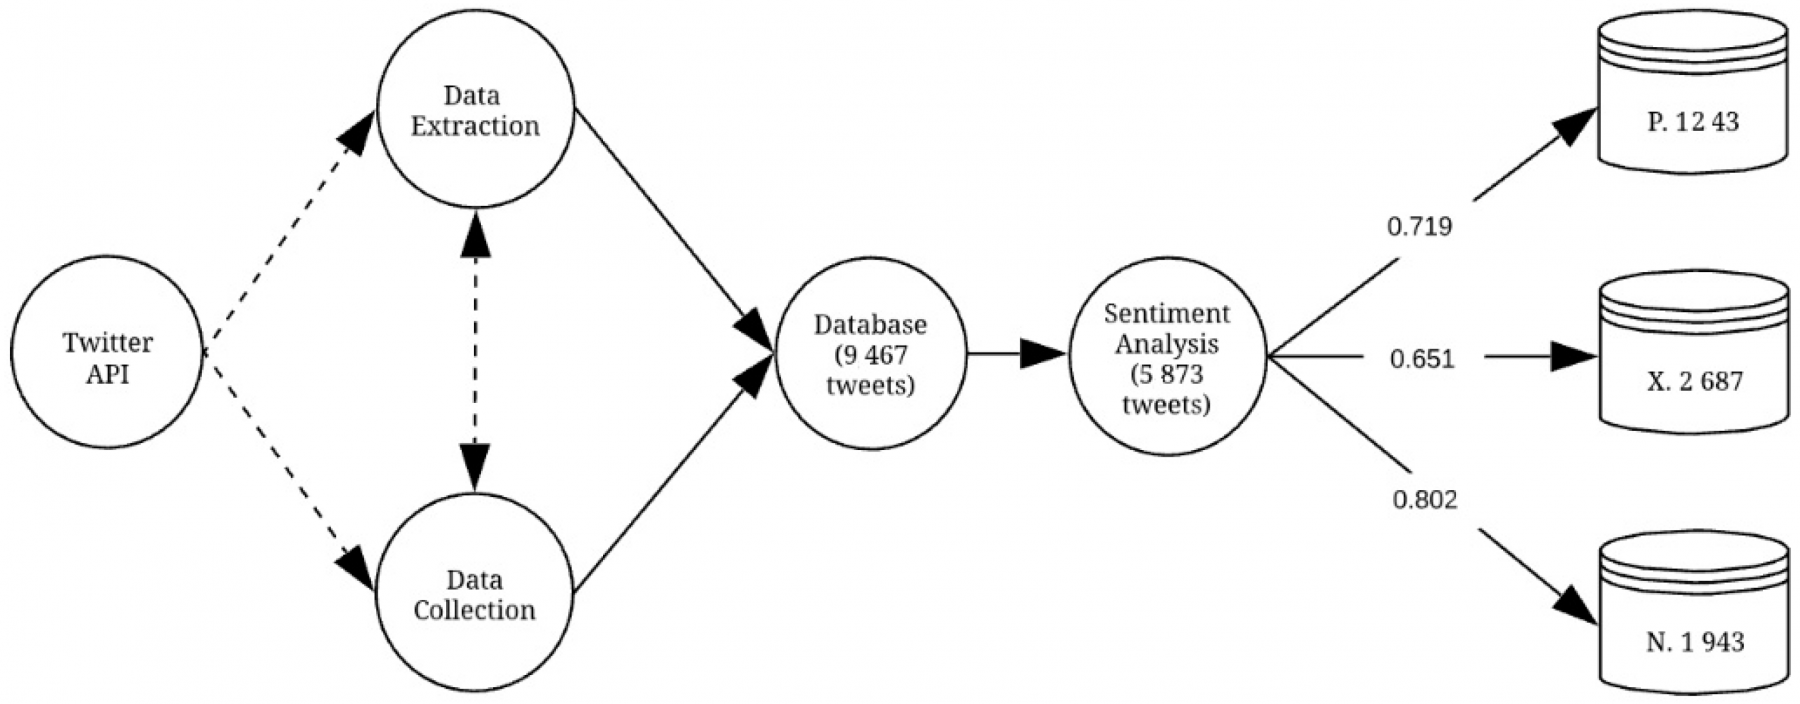 Sentiment Analysis of Top Colleges in India  Using Twitter Data project model circuit diagram